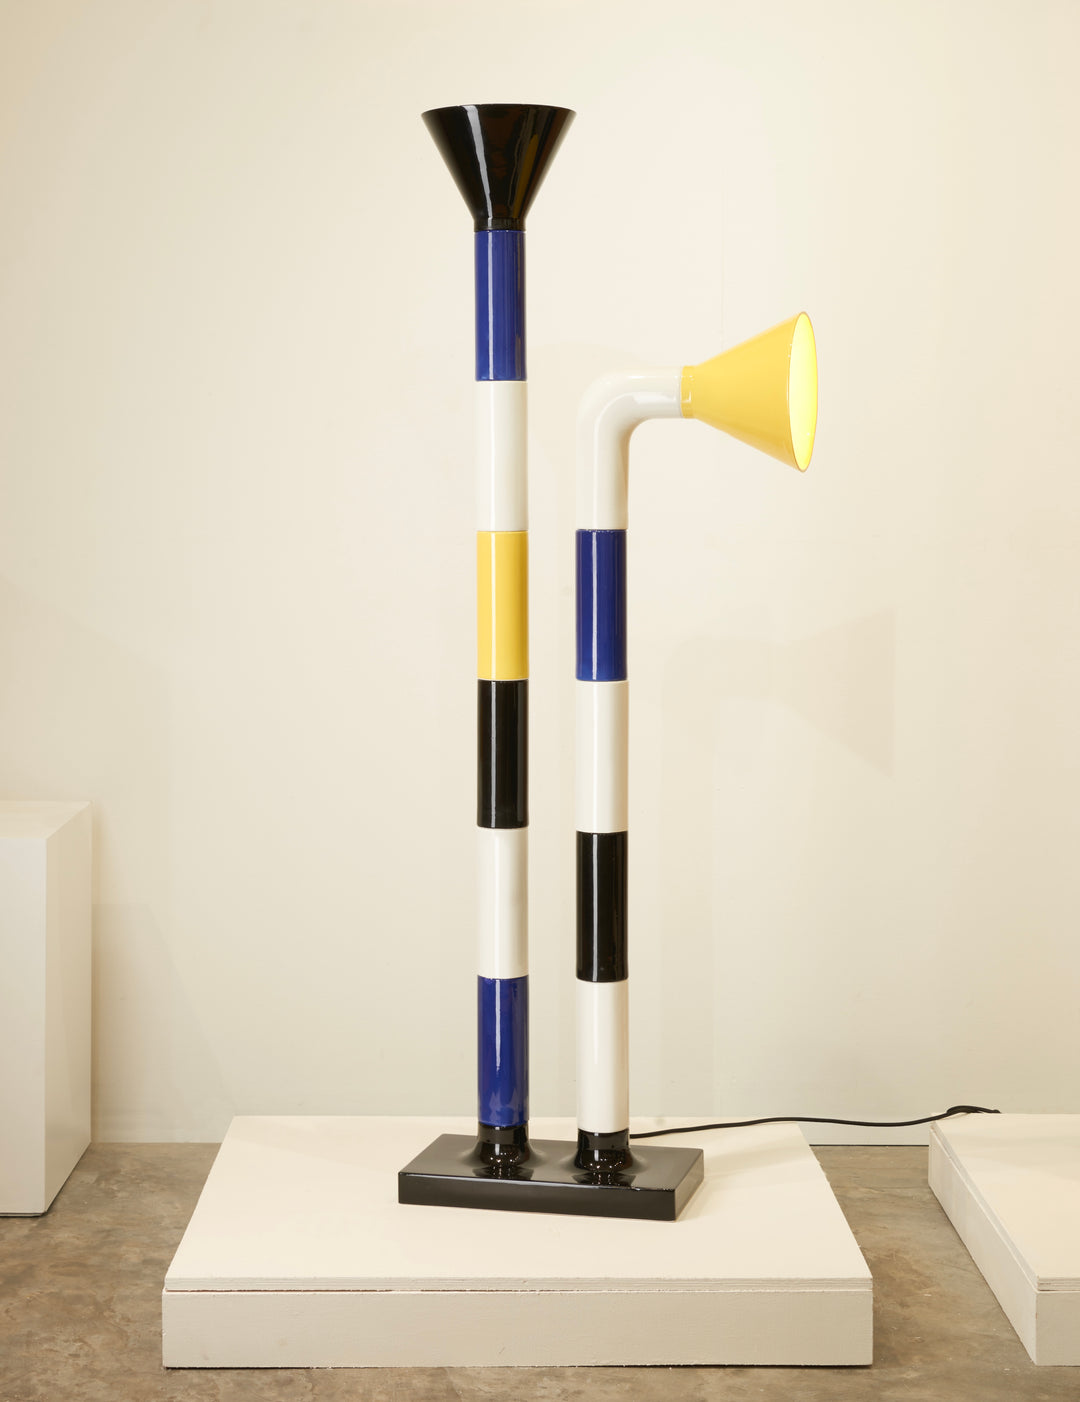 Introducing Milano, ceramic floorlamp - inspired by Italian design, the colors yellow, blu, white and black alternate as a jazz melody - #lightsculpture #functionalart #madeinitaly  - H140 x 45 x 20 cm  📸 @anaisbarelli